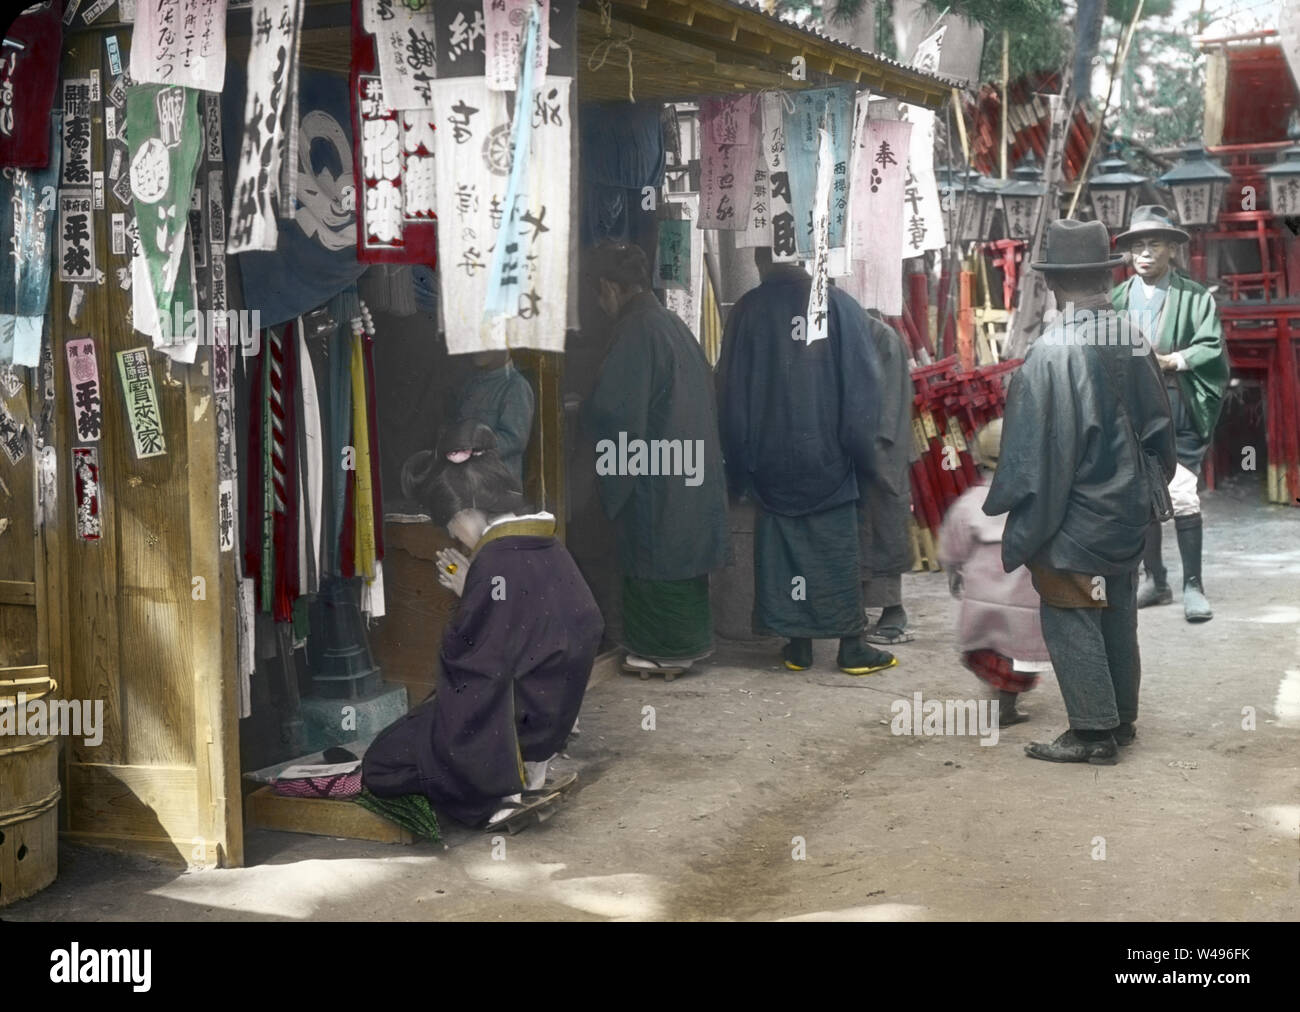 [ 1920s Japan - Japanese Woman Praying ] —   A woman in kimono is praying at the Anamori Inari Shrine (穴守稲荷神社) in Haneda, Tokyo. The shrine still exists and is popular with pregnant women and parents.  20th century vintage glass slide. Stock Photo